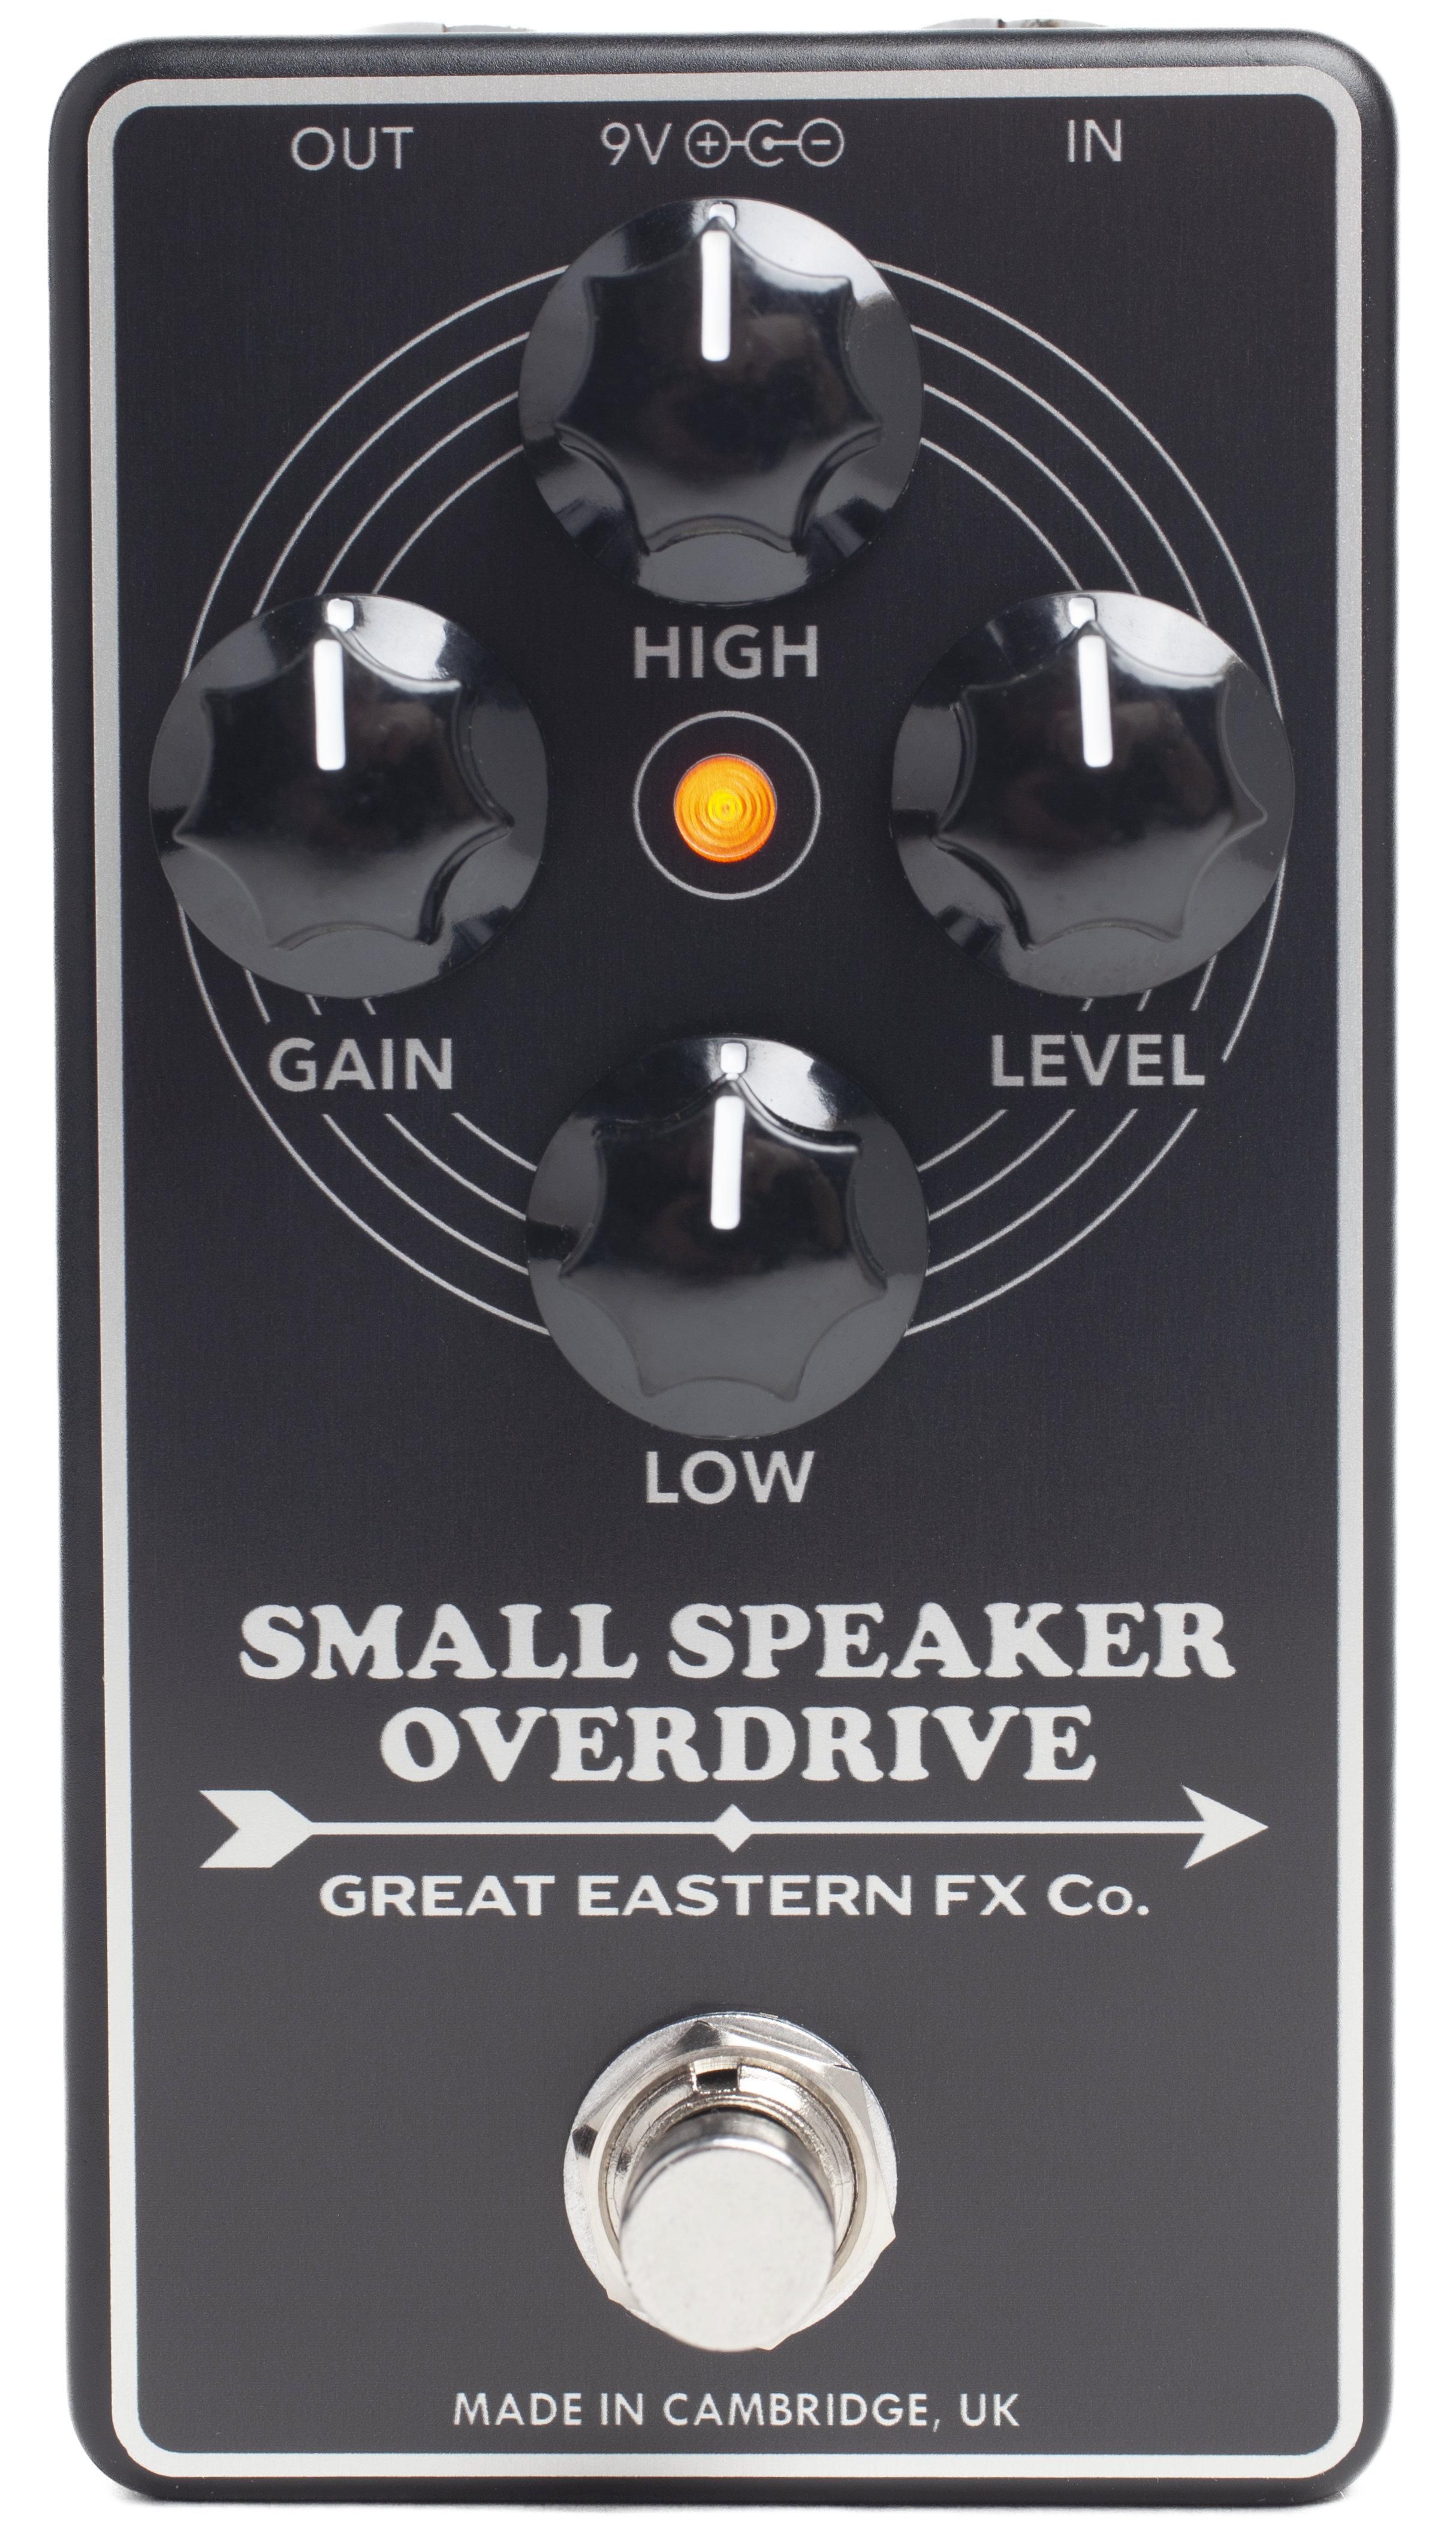 Great Eastern FX Releases the Small Speaker Overdrive